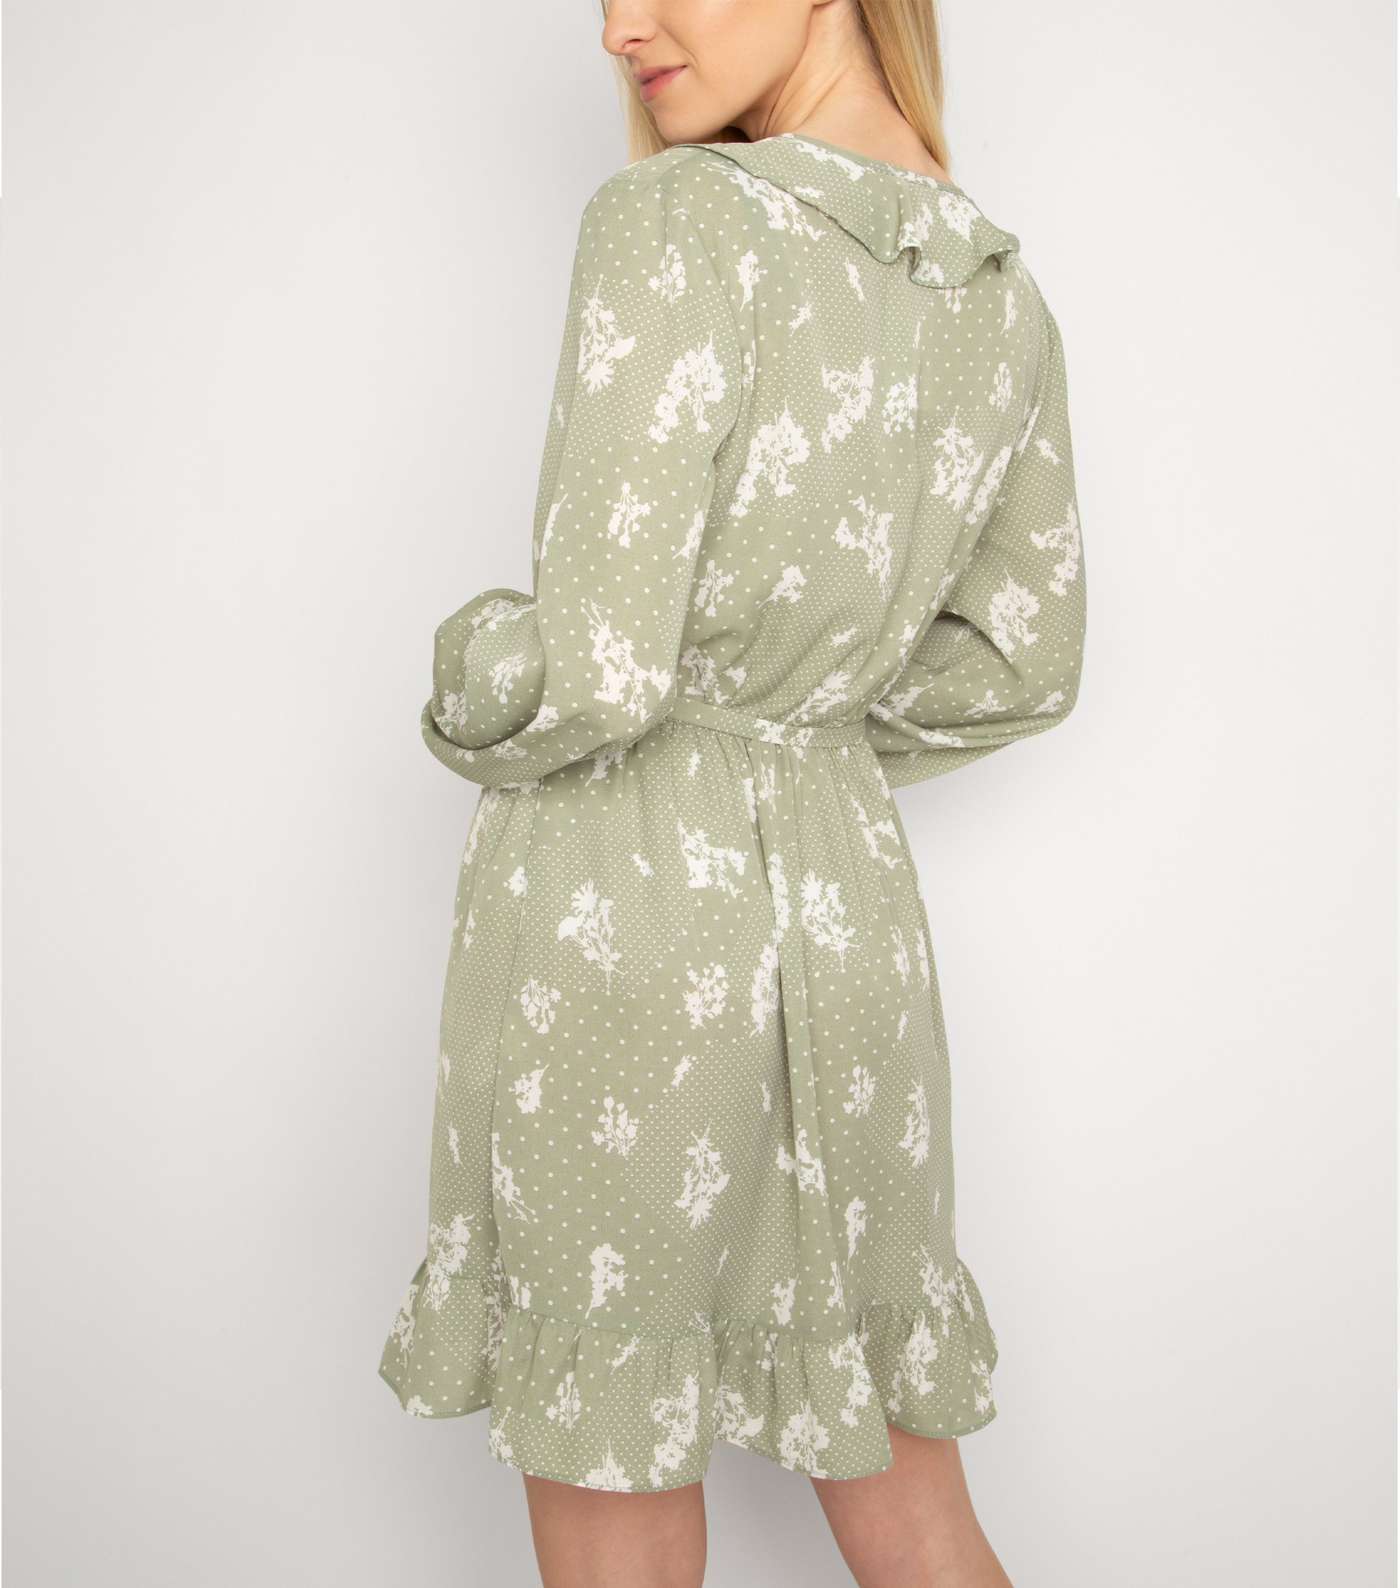 Another Look Mint Green Floral Spot Dress Image 3